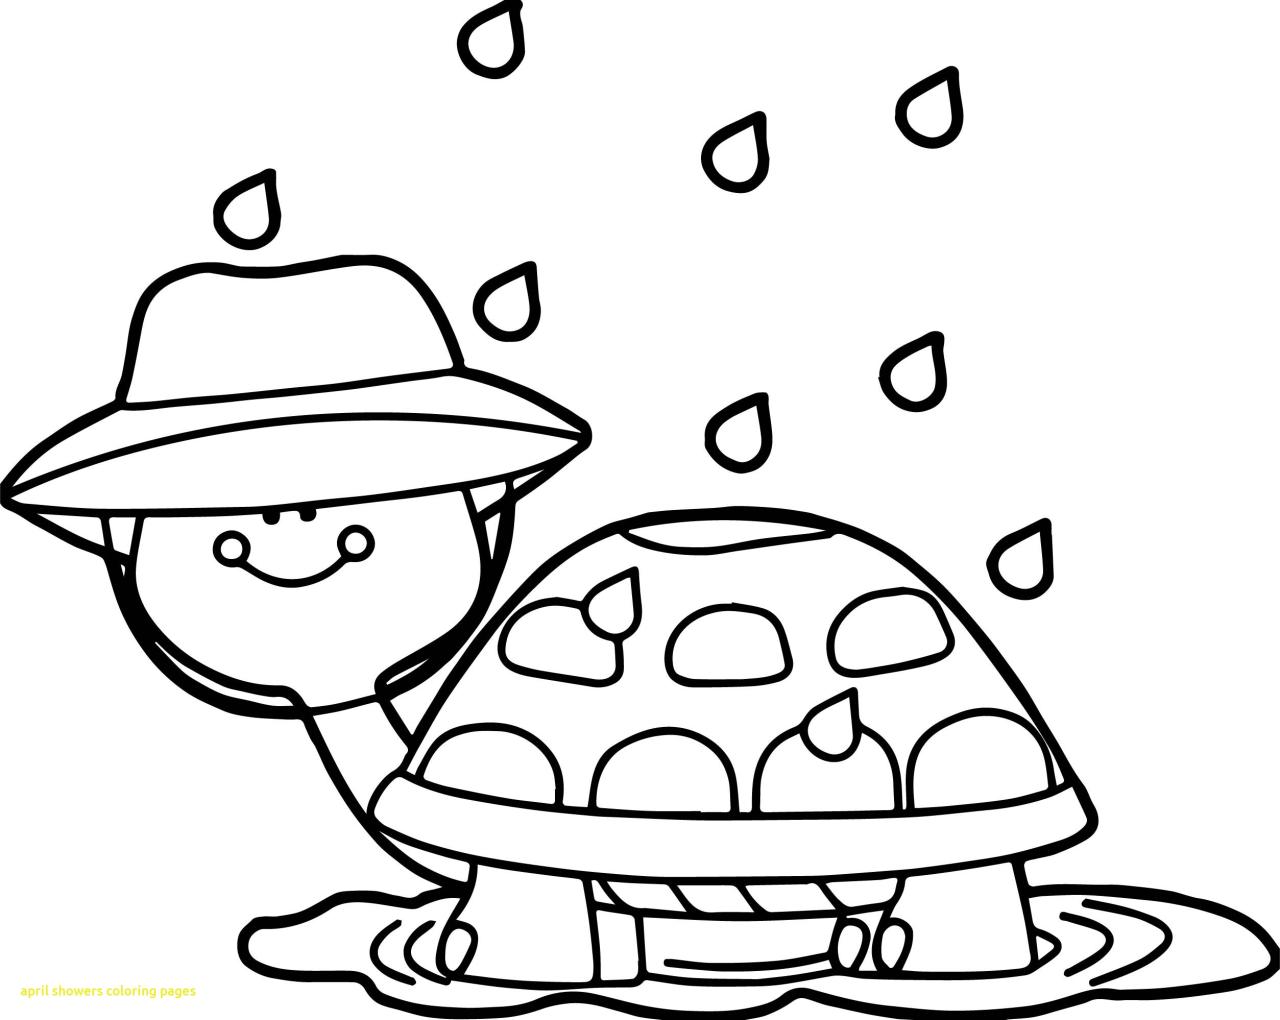 Tow Truck Coloring Pages